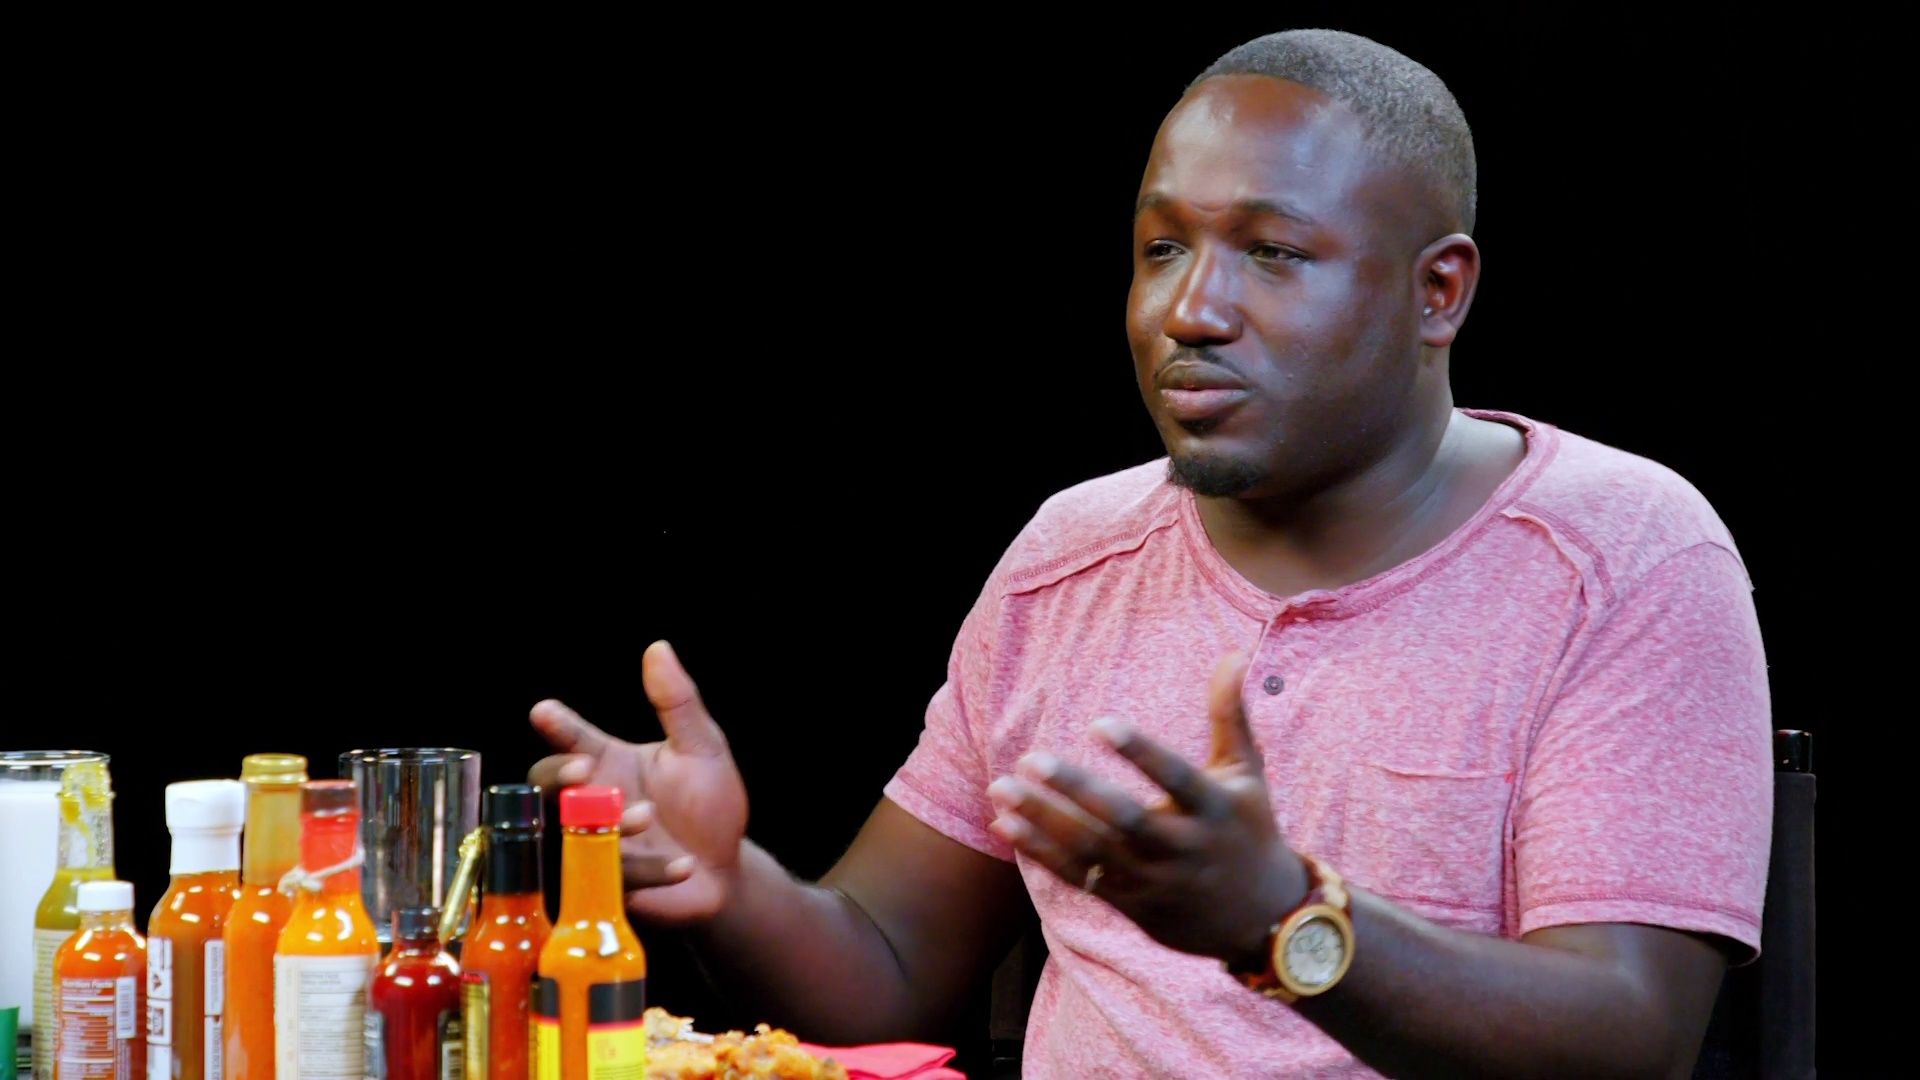 Hannibal Buress Freestyles While Eating Spicy Wings